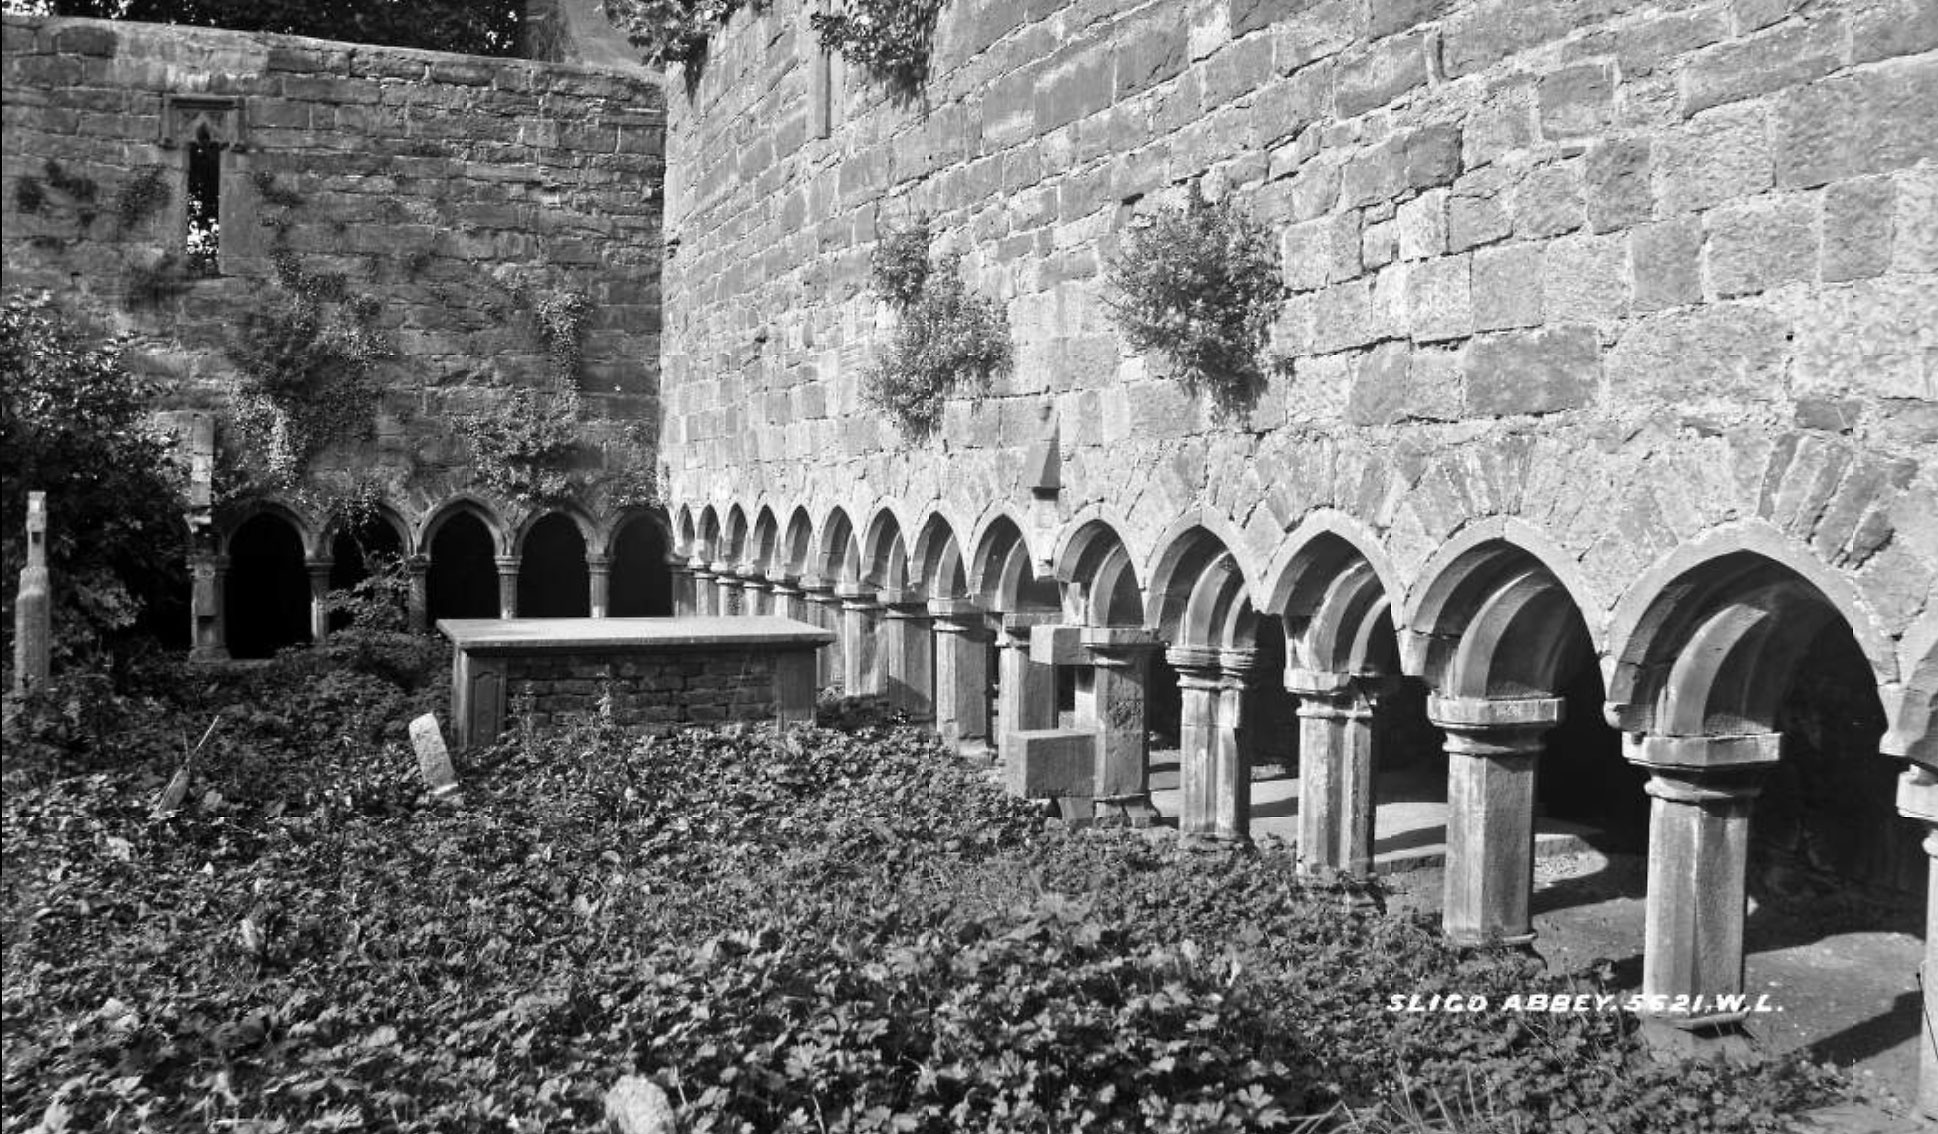 An early photograph of the heavily overgrown cloisters within the Dominican Friary at Sligo from the Lawrence Collection in the National Library of Ireland.